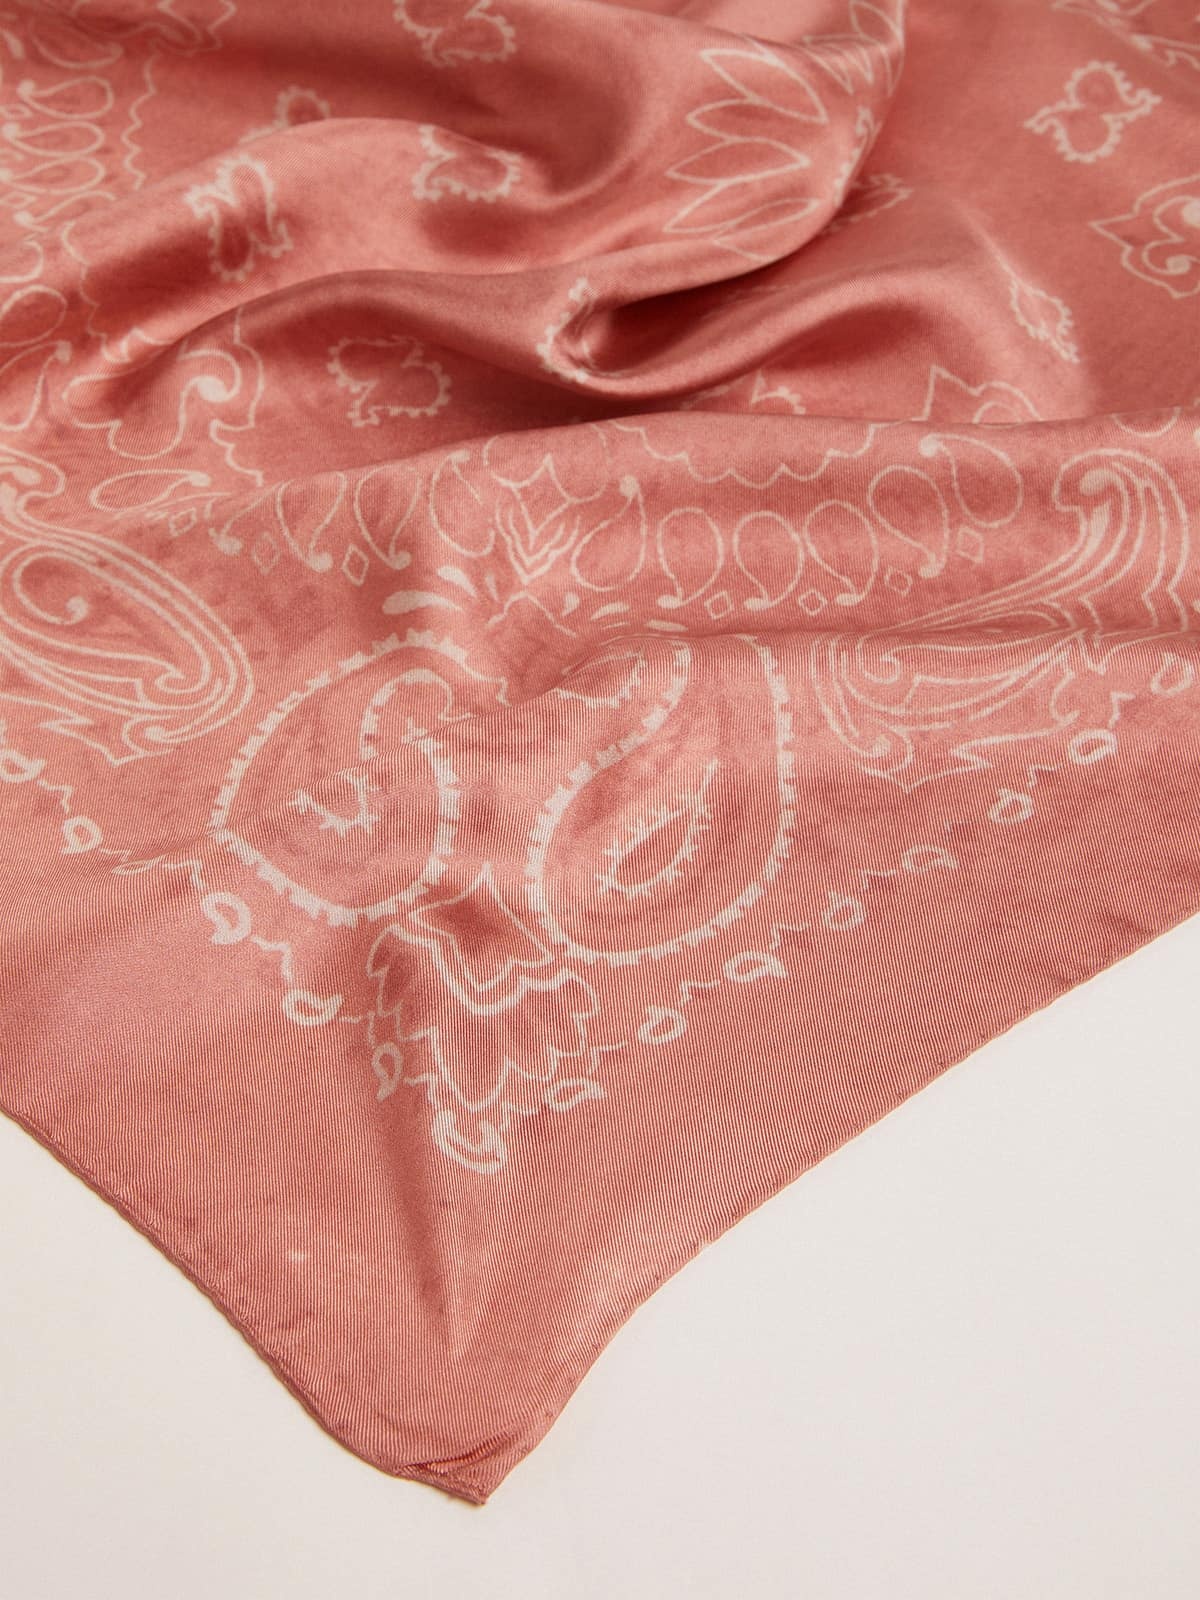 Old rose scarf with paisley print - 2